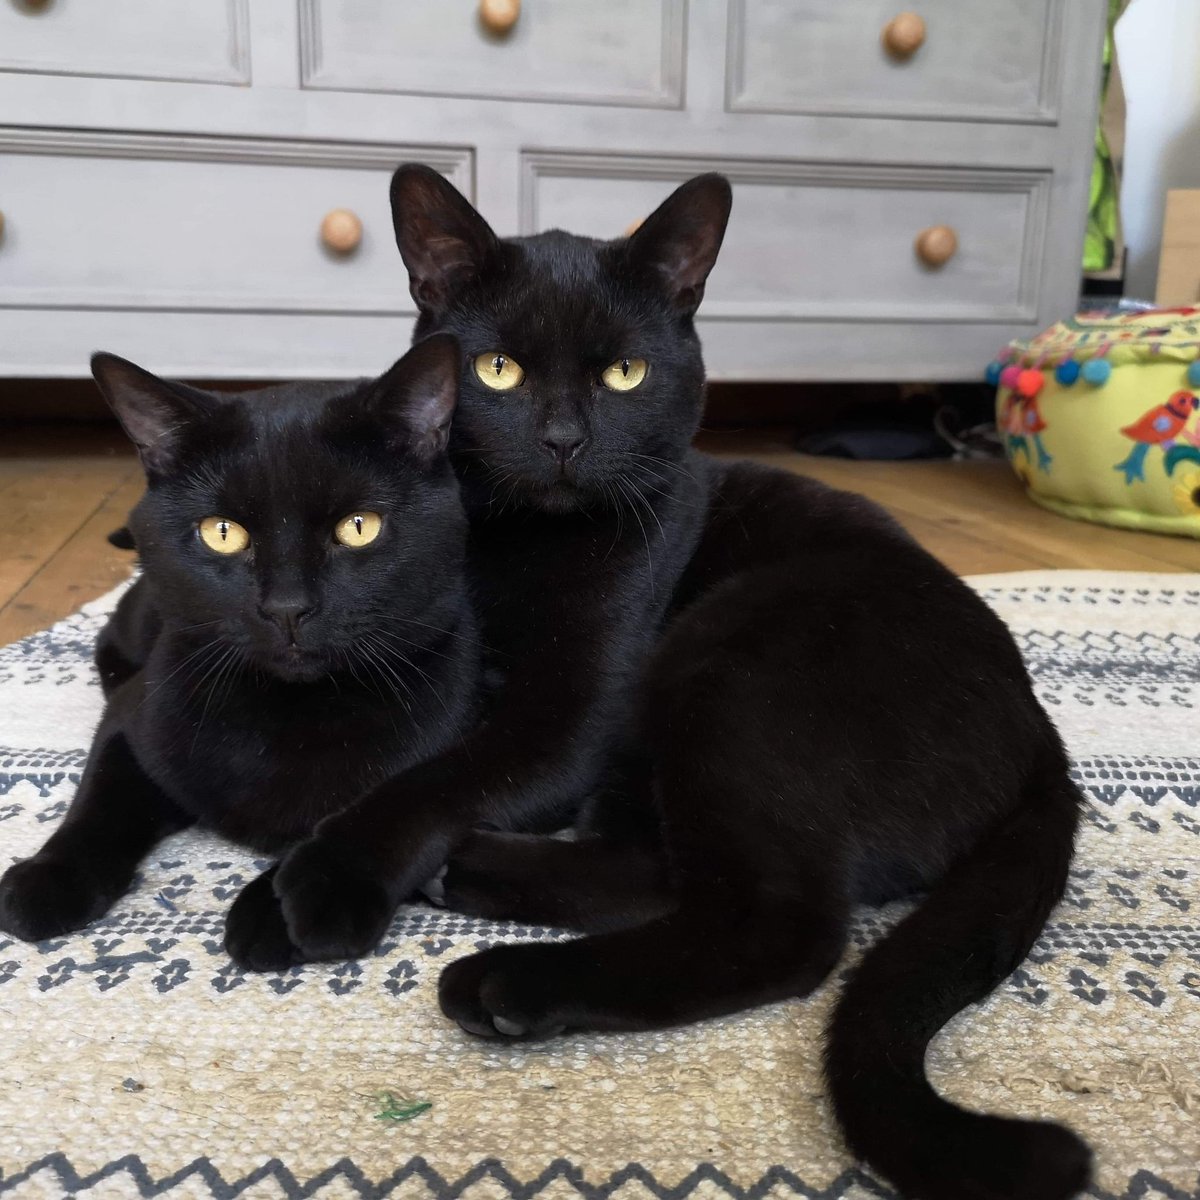 Black cats are hard enough to home but when you have a bonded pair of brothers it almost seems impossible 😢 #BlackCats #Rescue #AdoptDontShop #NeuterYourCats